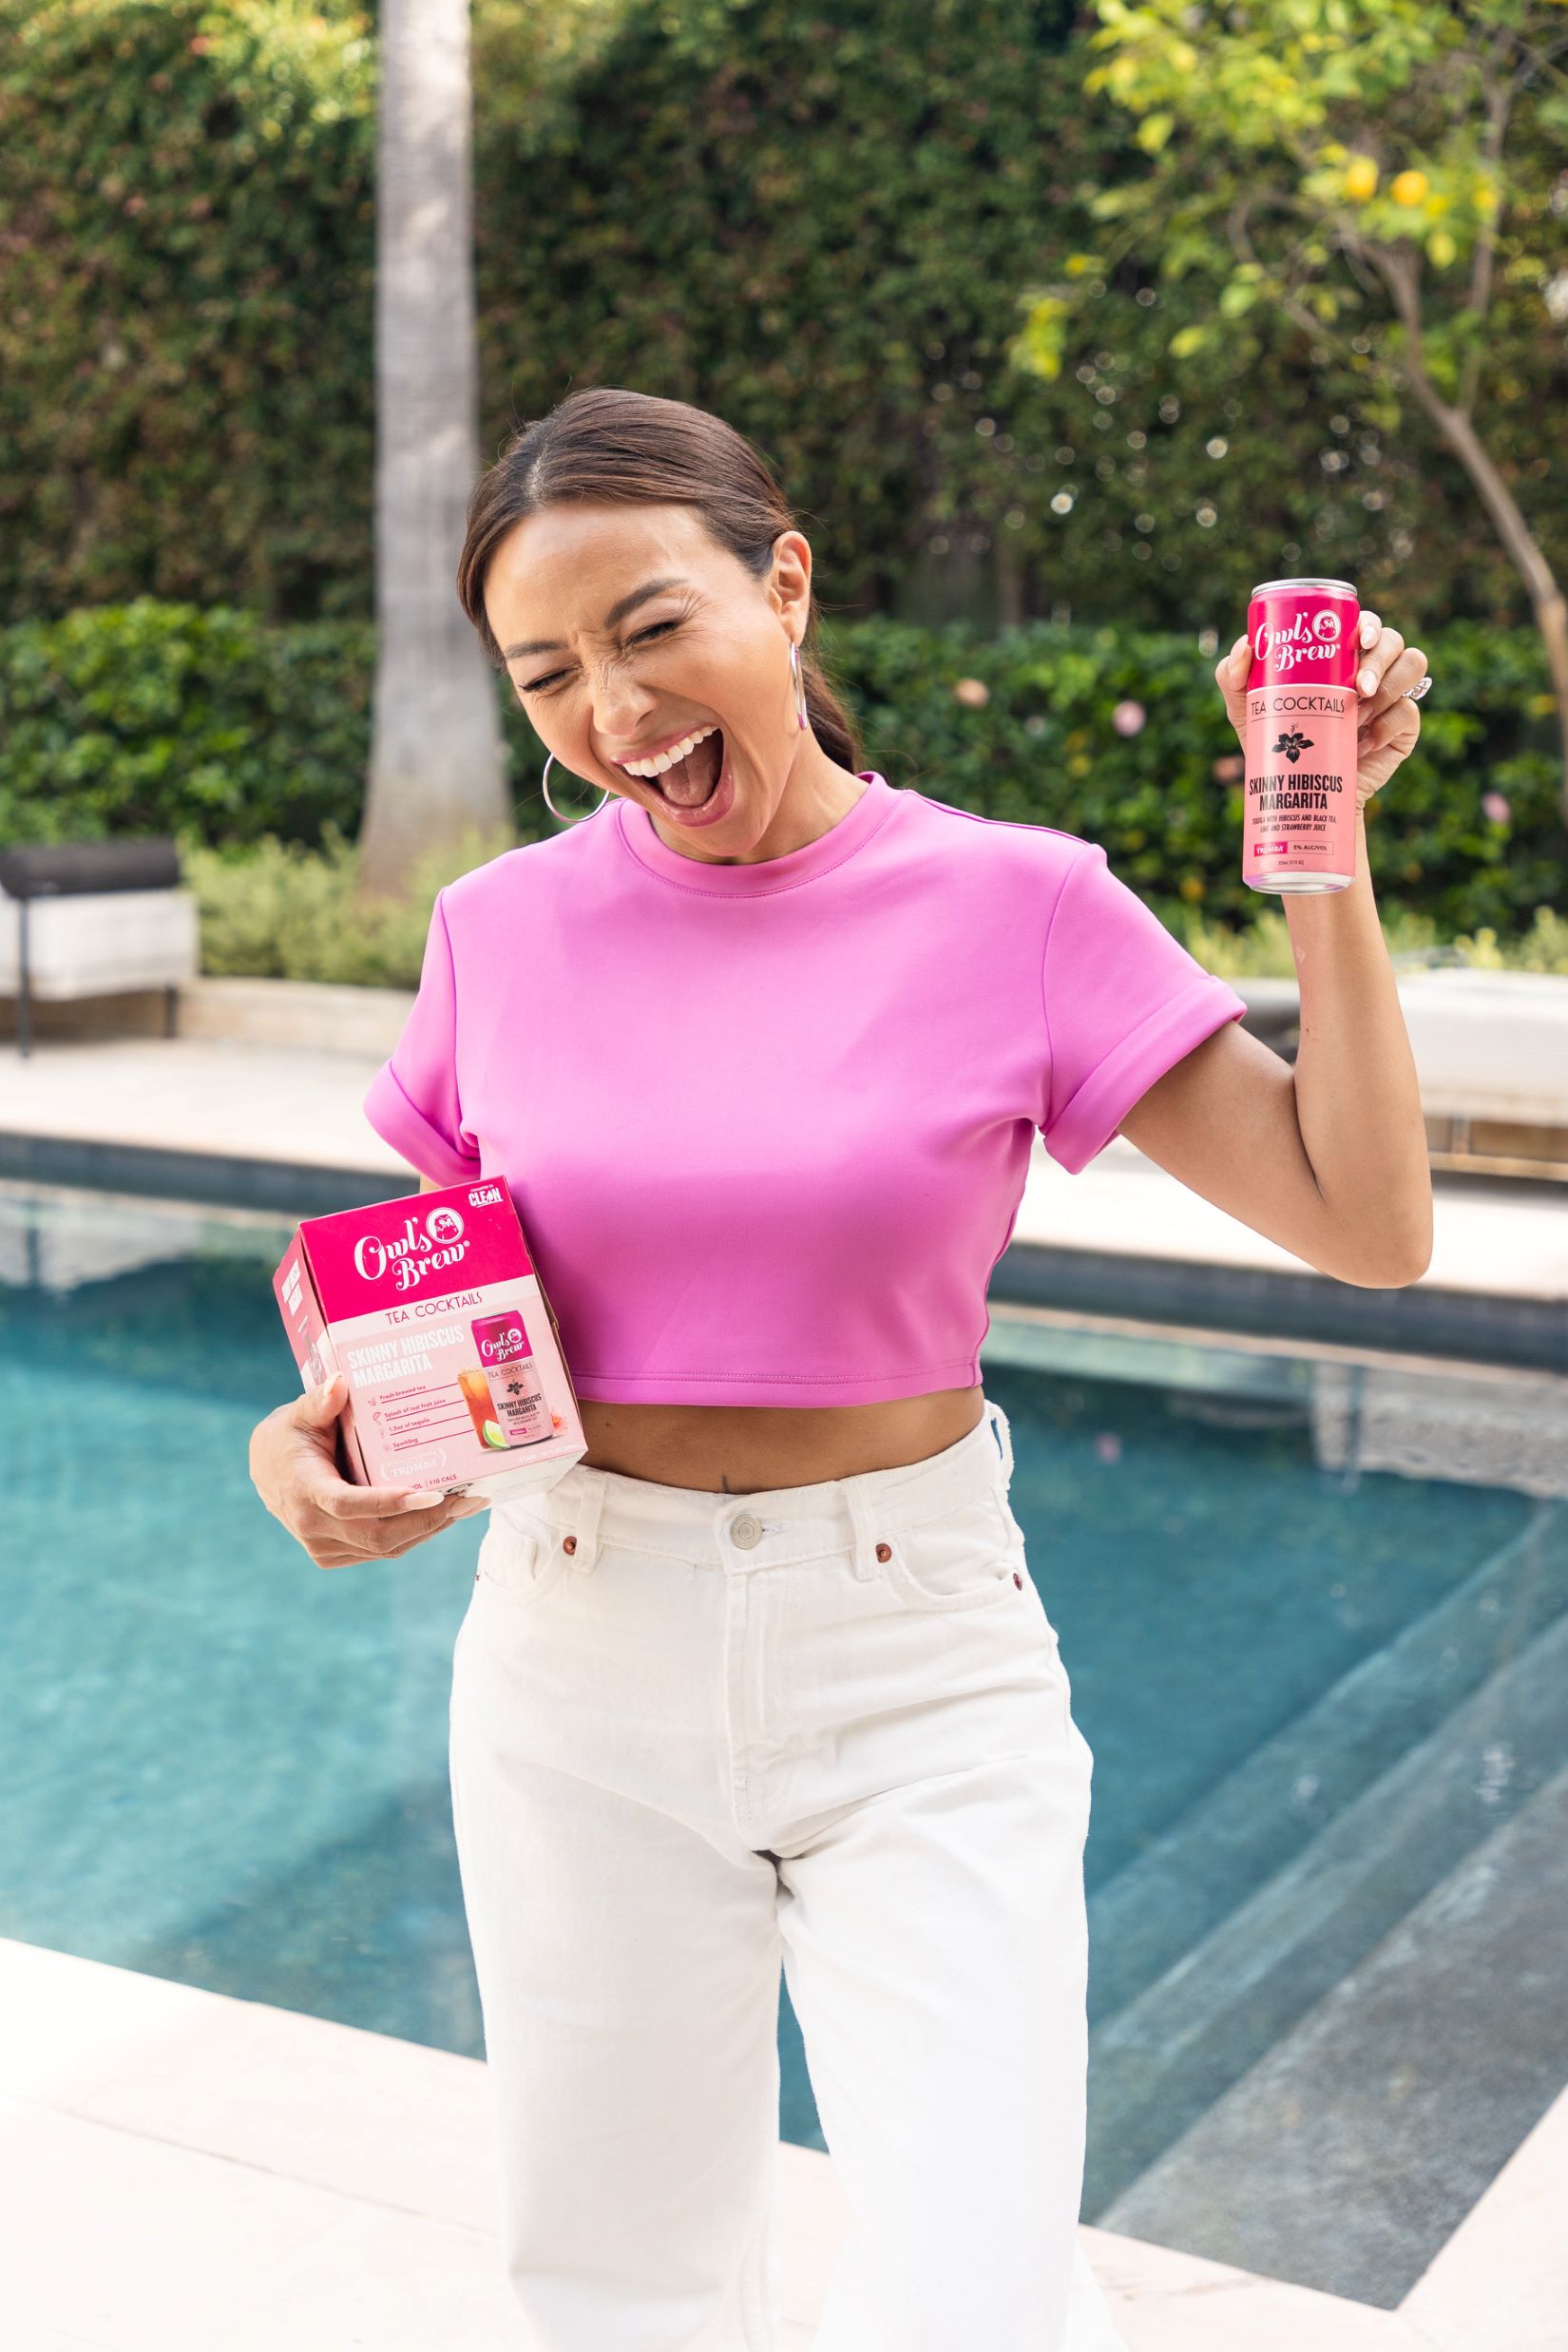 An image of Jeannie Mai cheering with a can of Owl's Brew Skinny Margarita